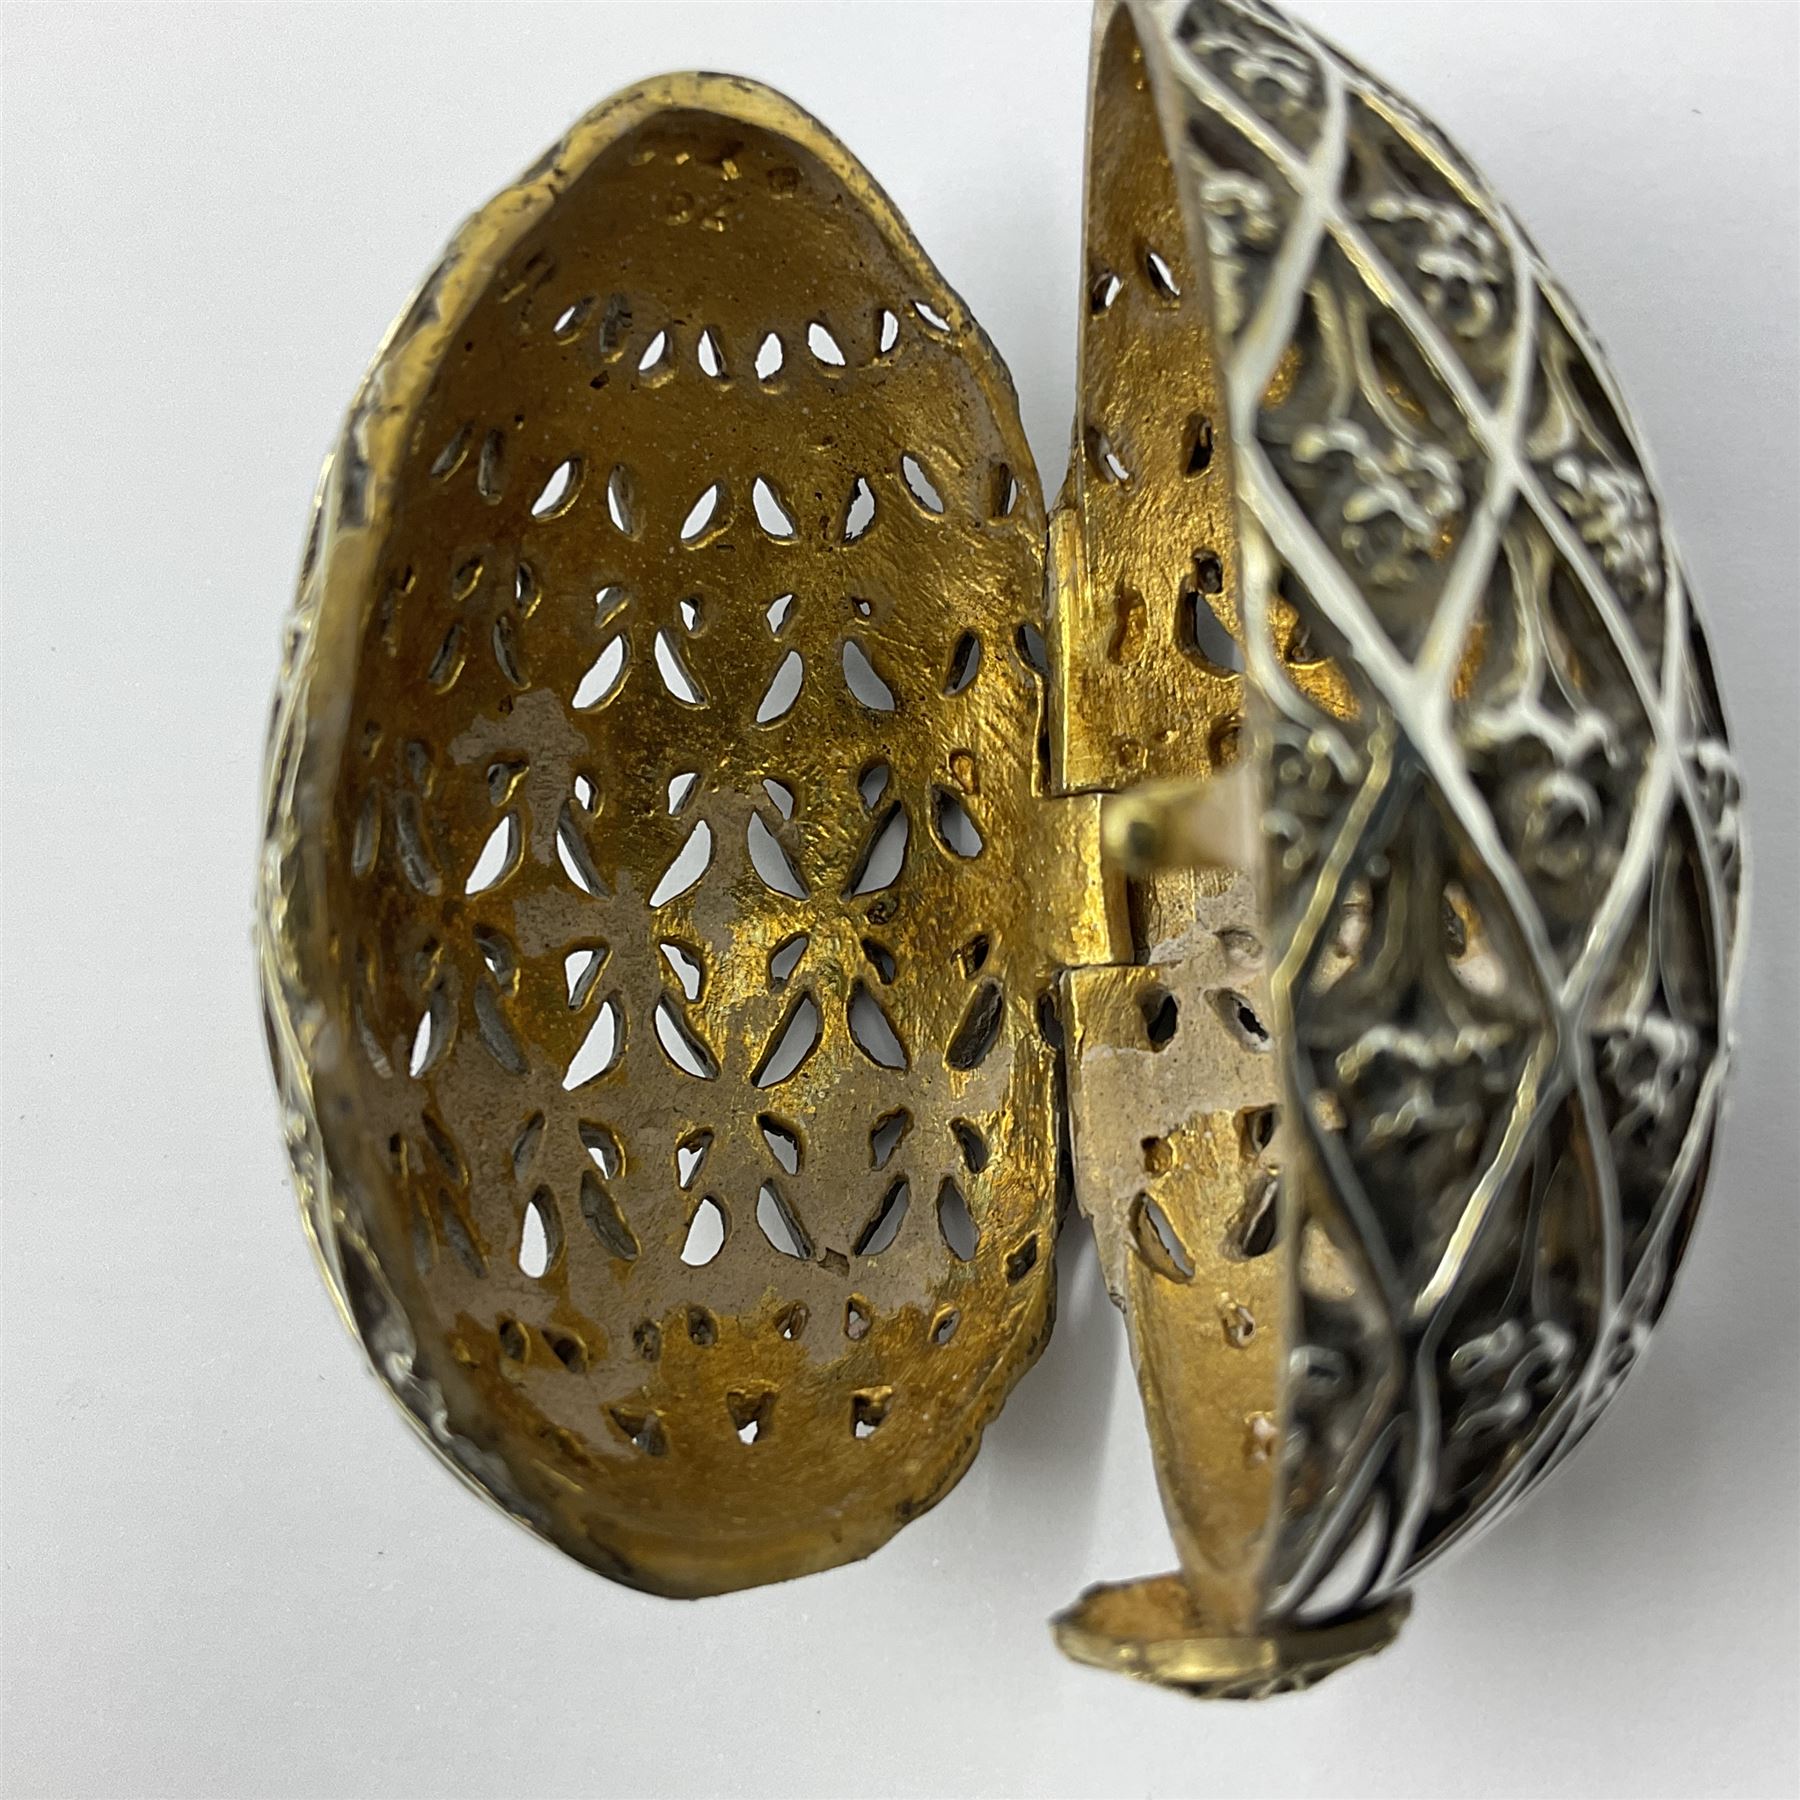 Modern silver limited edition Easter egg - Image 10 of 19